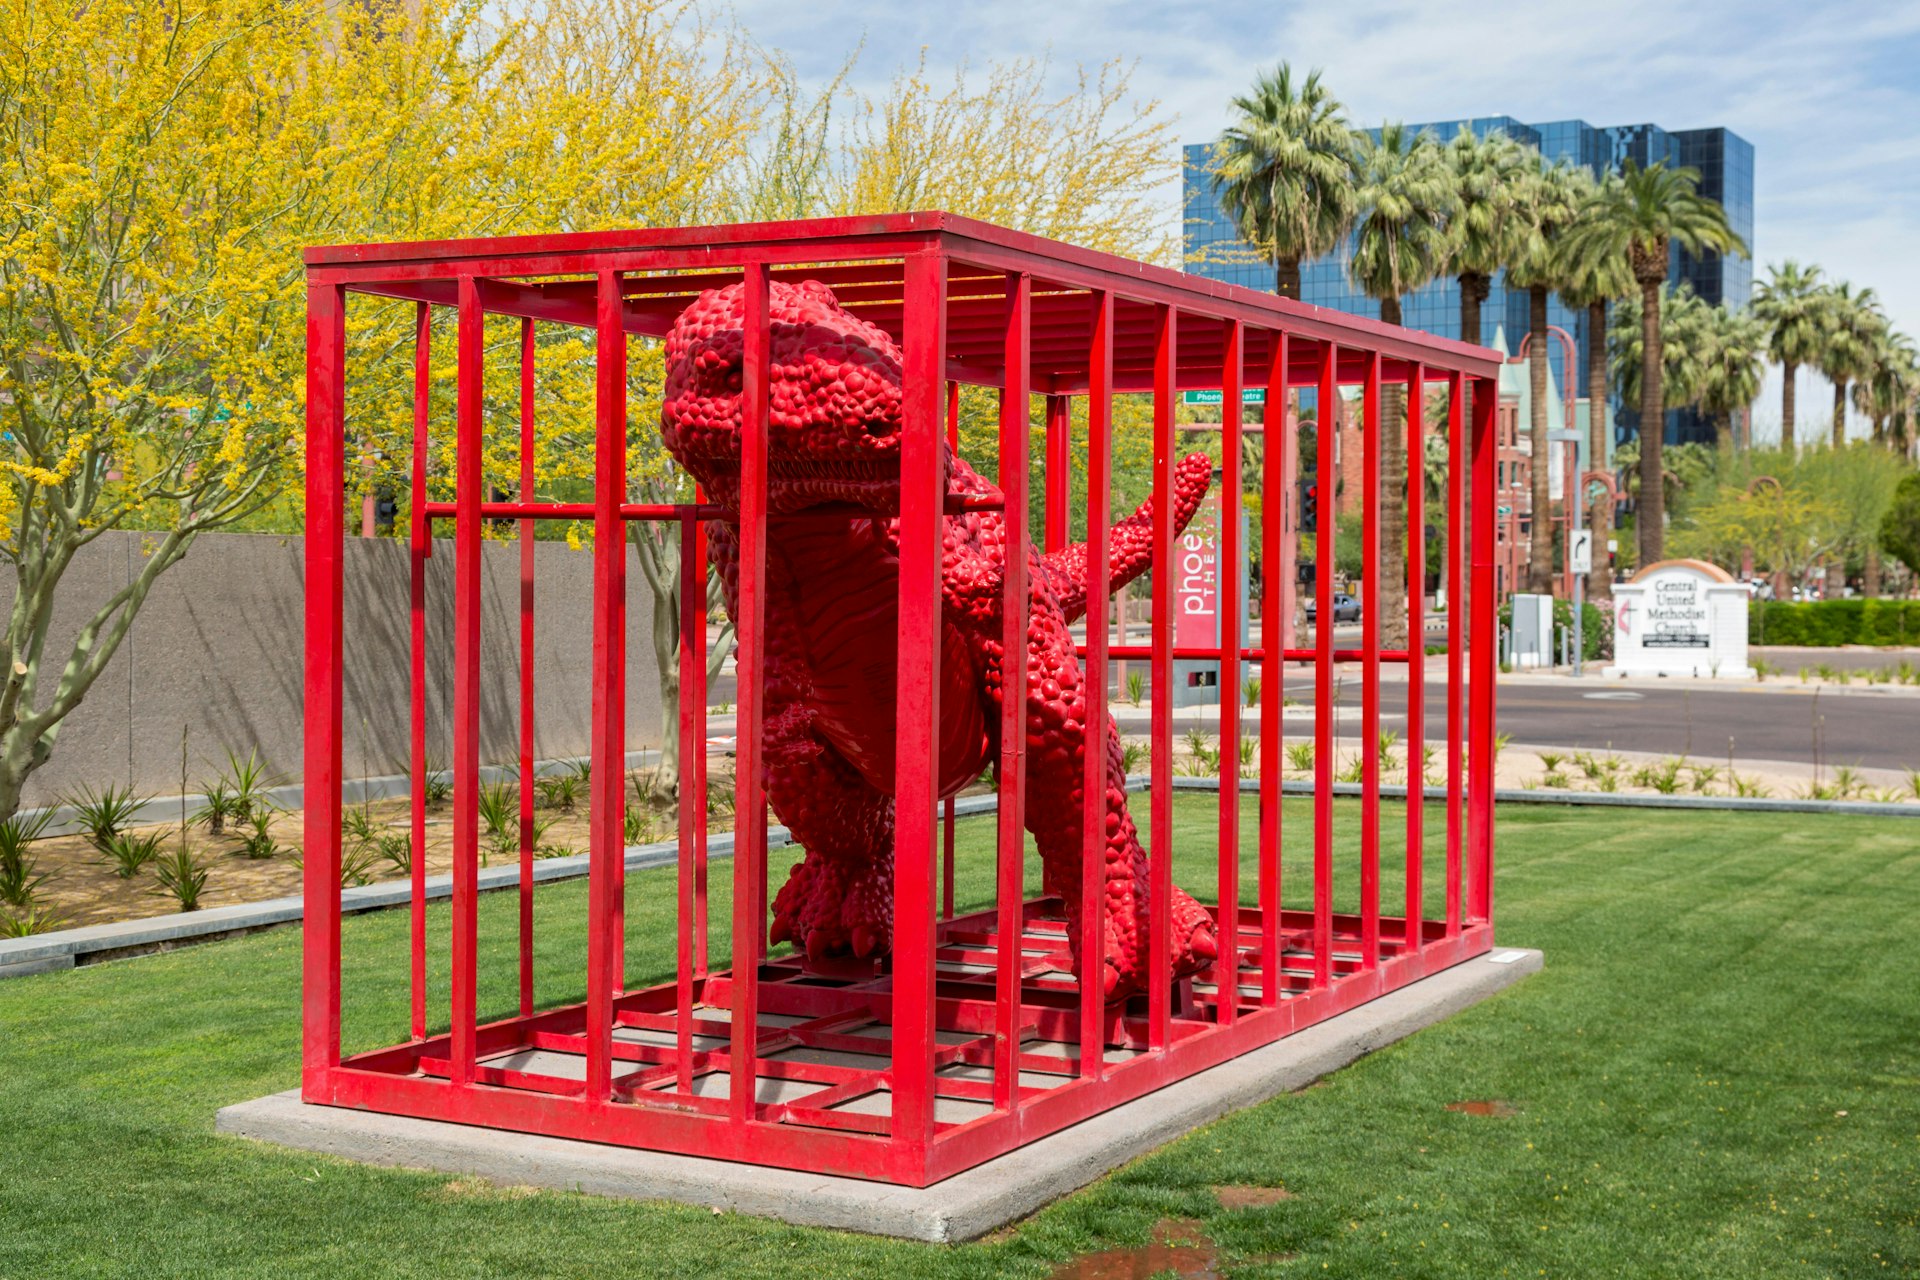 A red dinosaur in a red cage in the grounds of an art museums